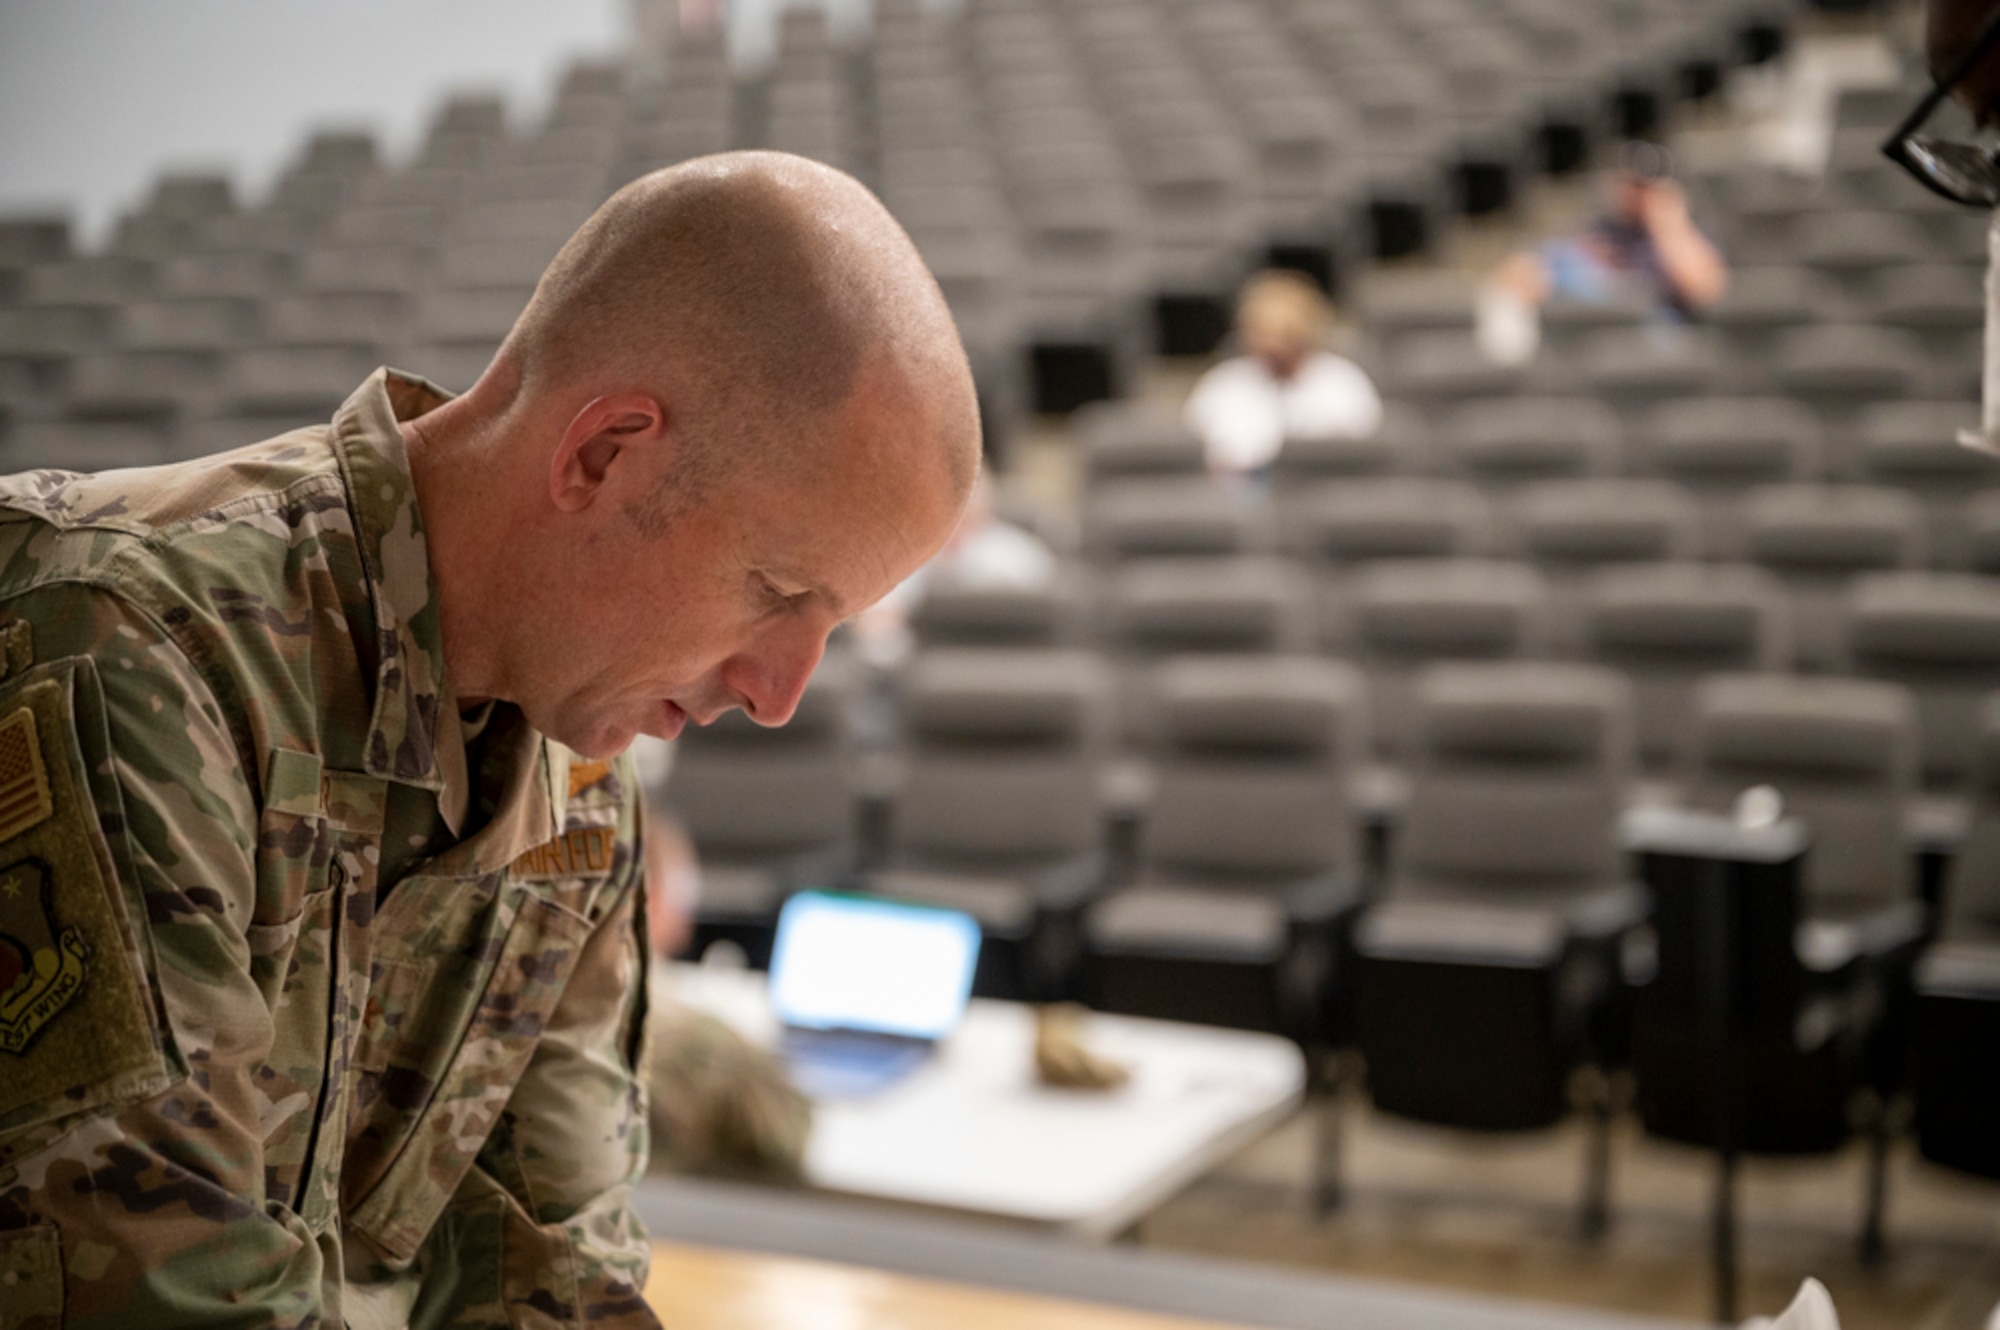 U.S. Air Force Brig. Gen. Matthew Higer, Commander of the 412th Test Wing at Edwards AFB, California, was randomly selected to be tested for COVID-19 as part of this new health measure.